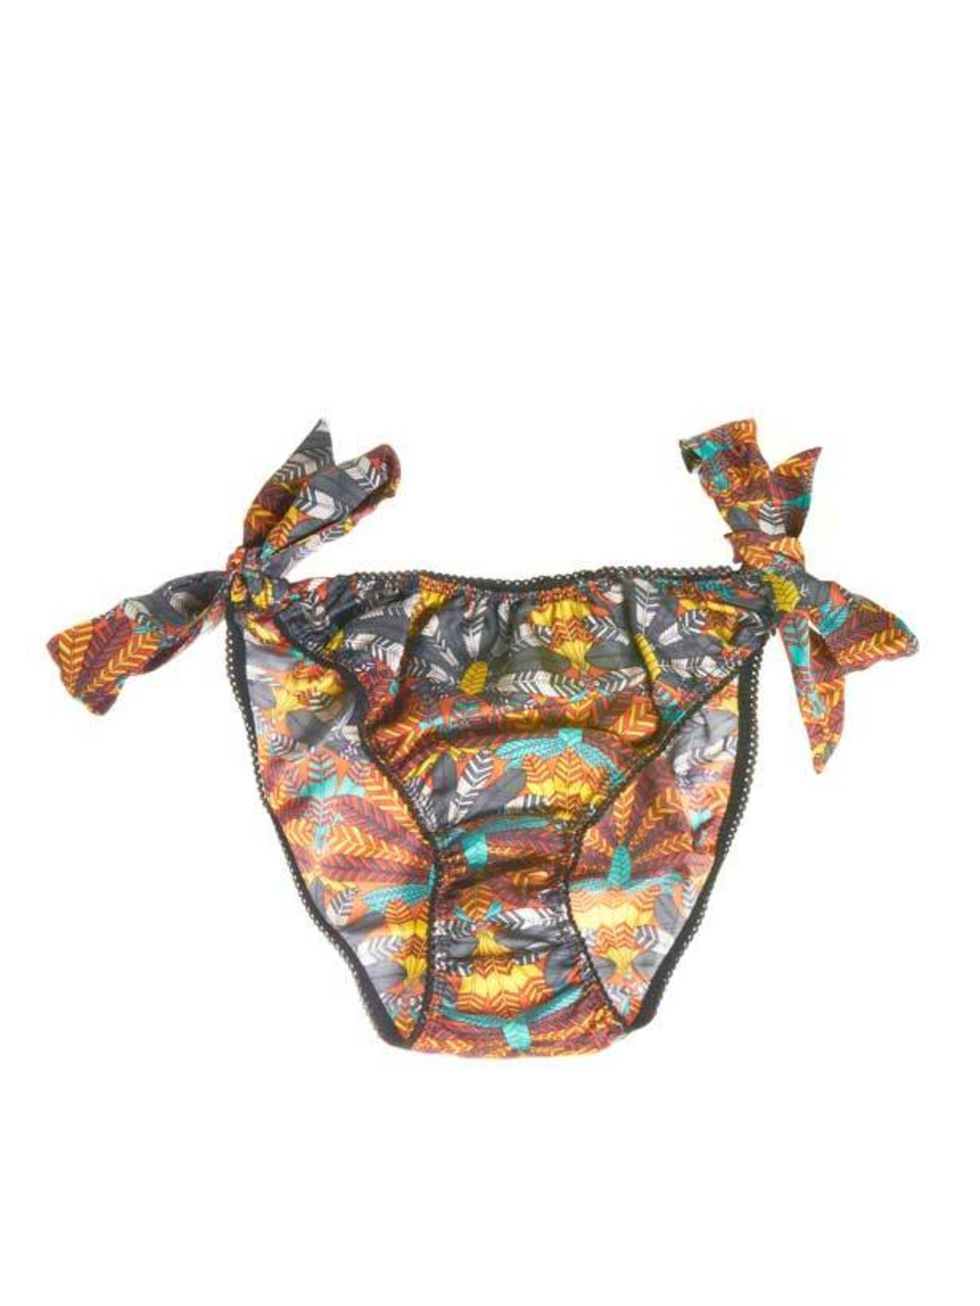 <p><a href="http://www.cielshop.co.uk/acatalog/Liberty_Coral_Feather_Print_Knickers.html">Ciel</a> Liberty print knickers, £34</p>